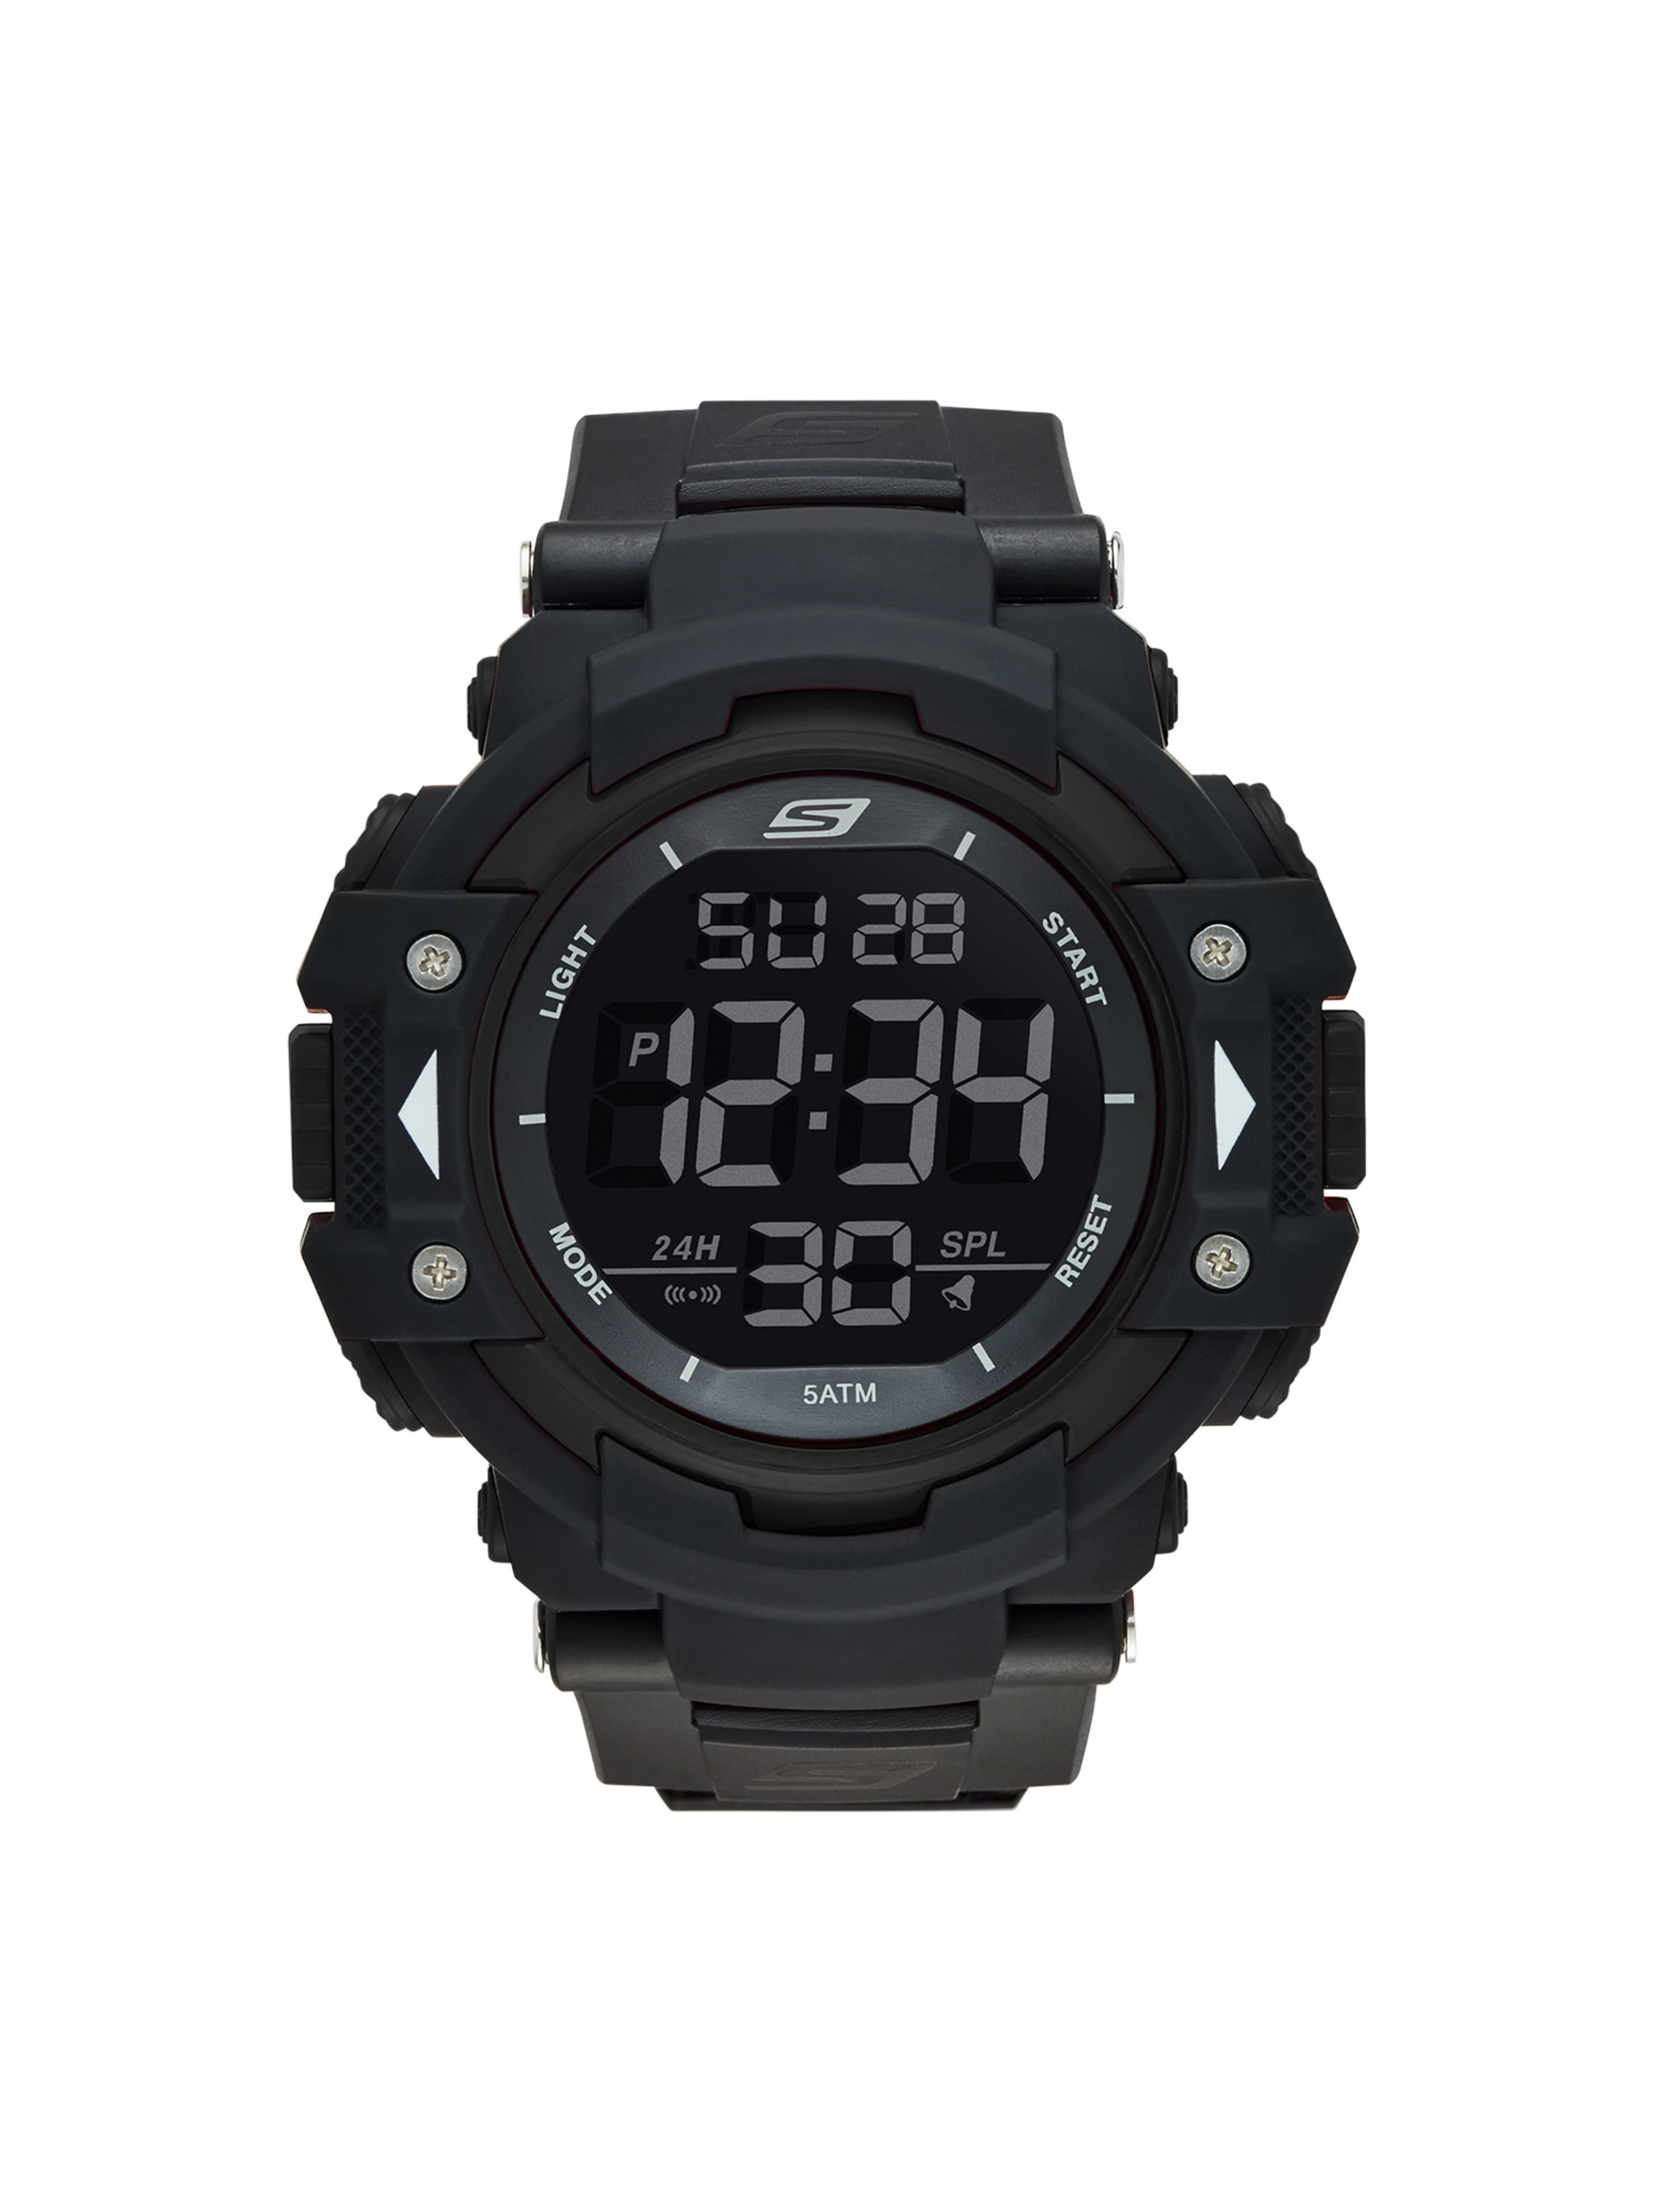 Skechers Synthetic Flournoy Quartz Nylon Casual Sports Digital Watch in Black Womens Mens Accessories Mens Watches 